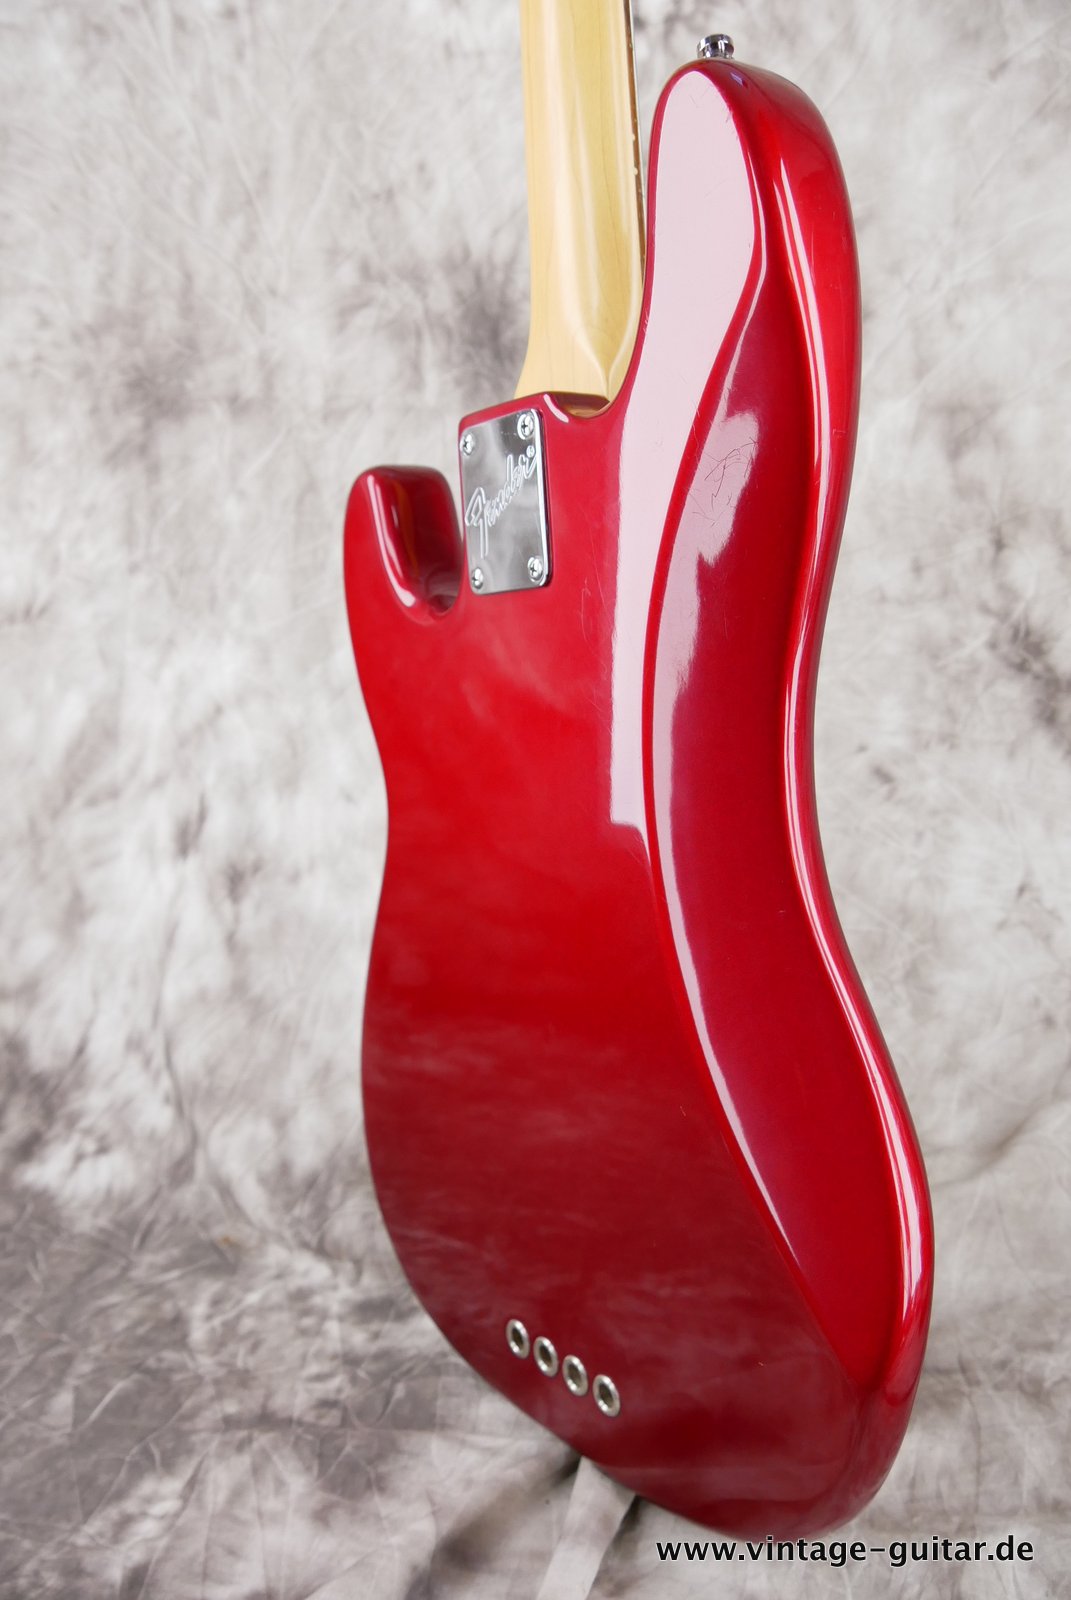 Fender-Precision-Bass-1994-candy-apple-red-008.JPG